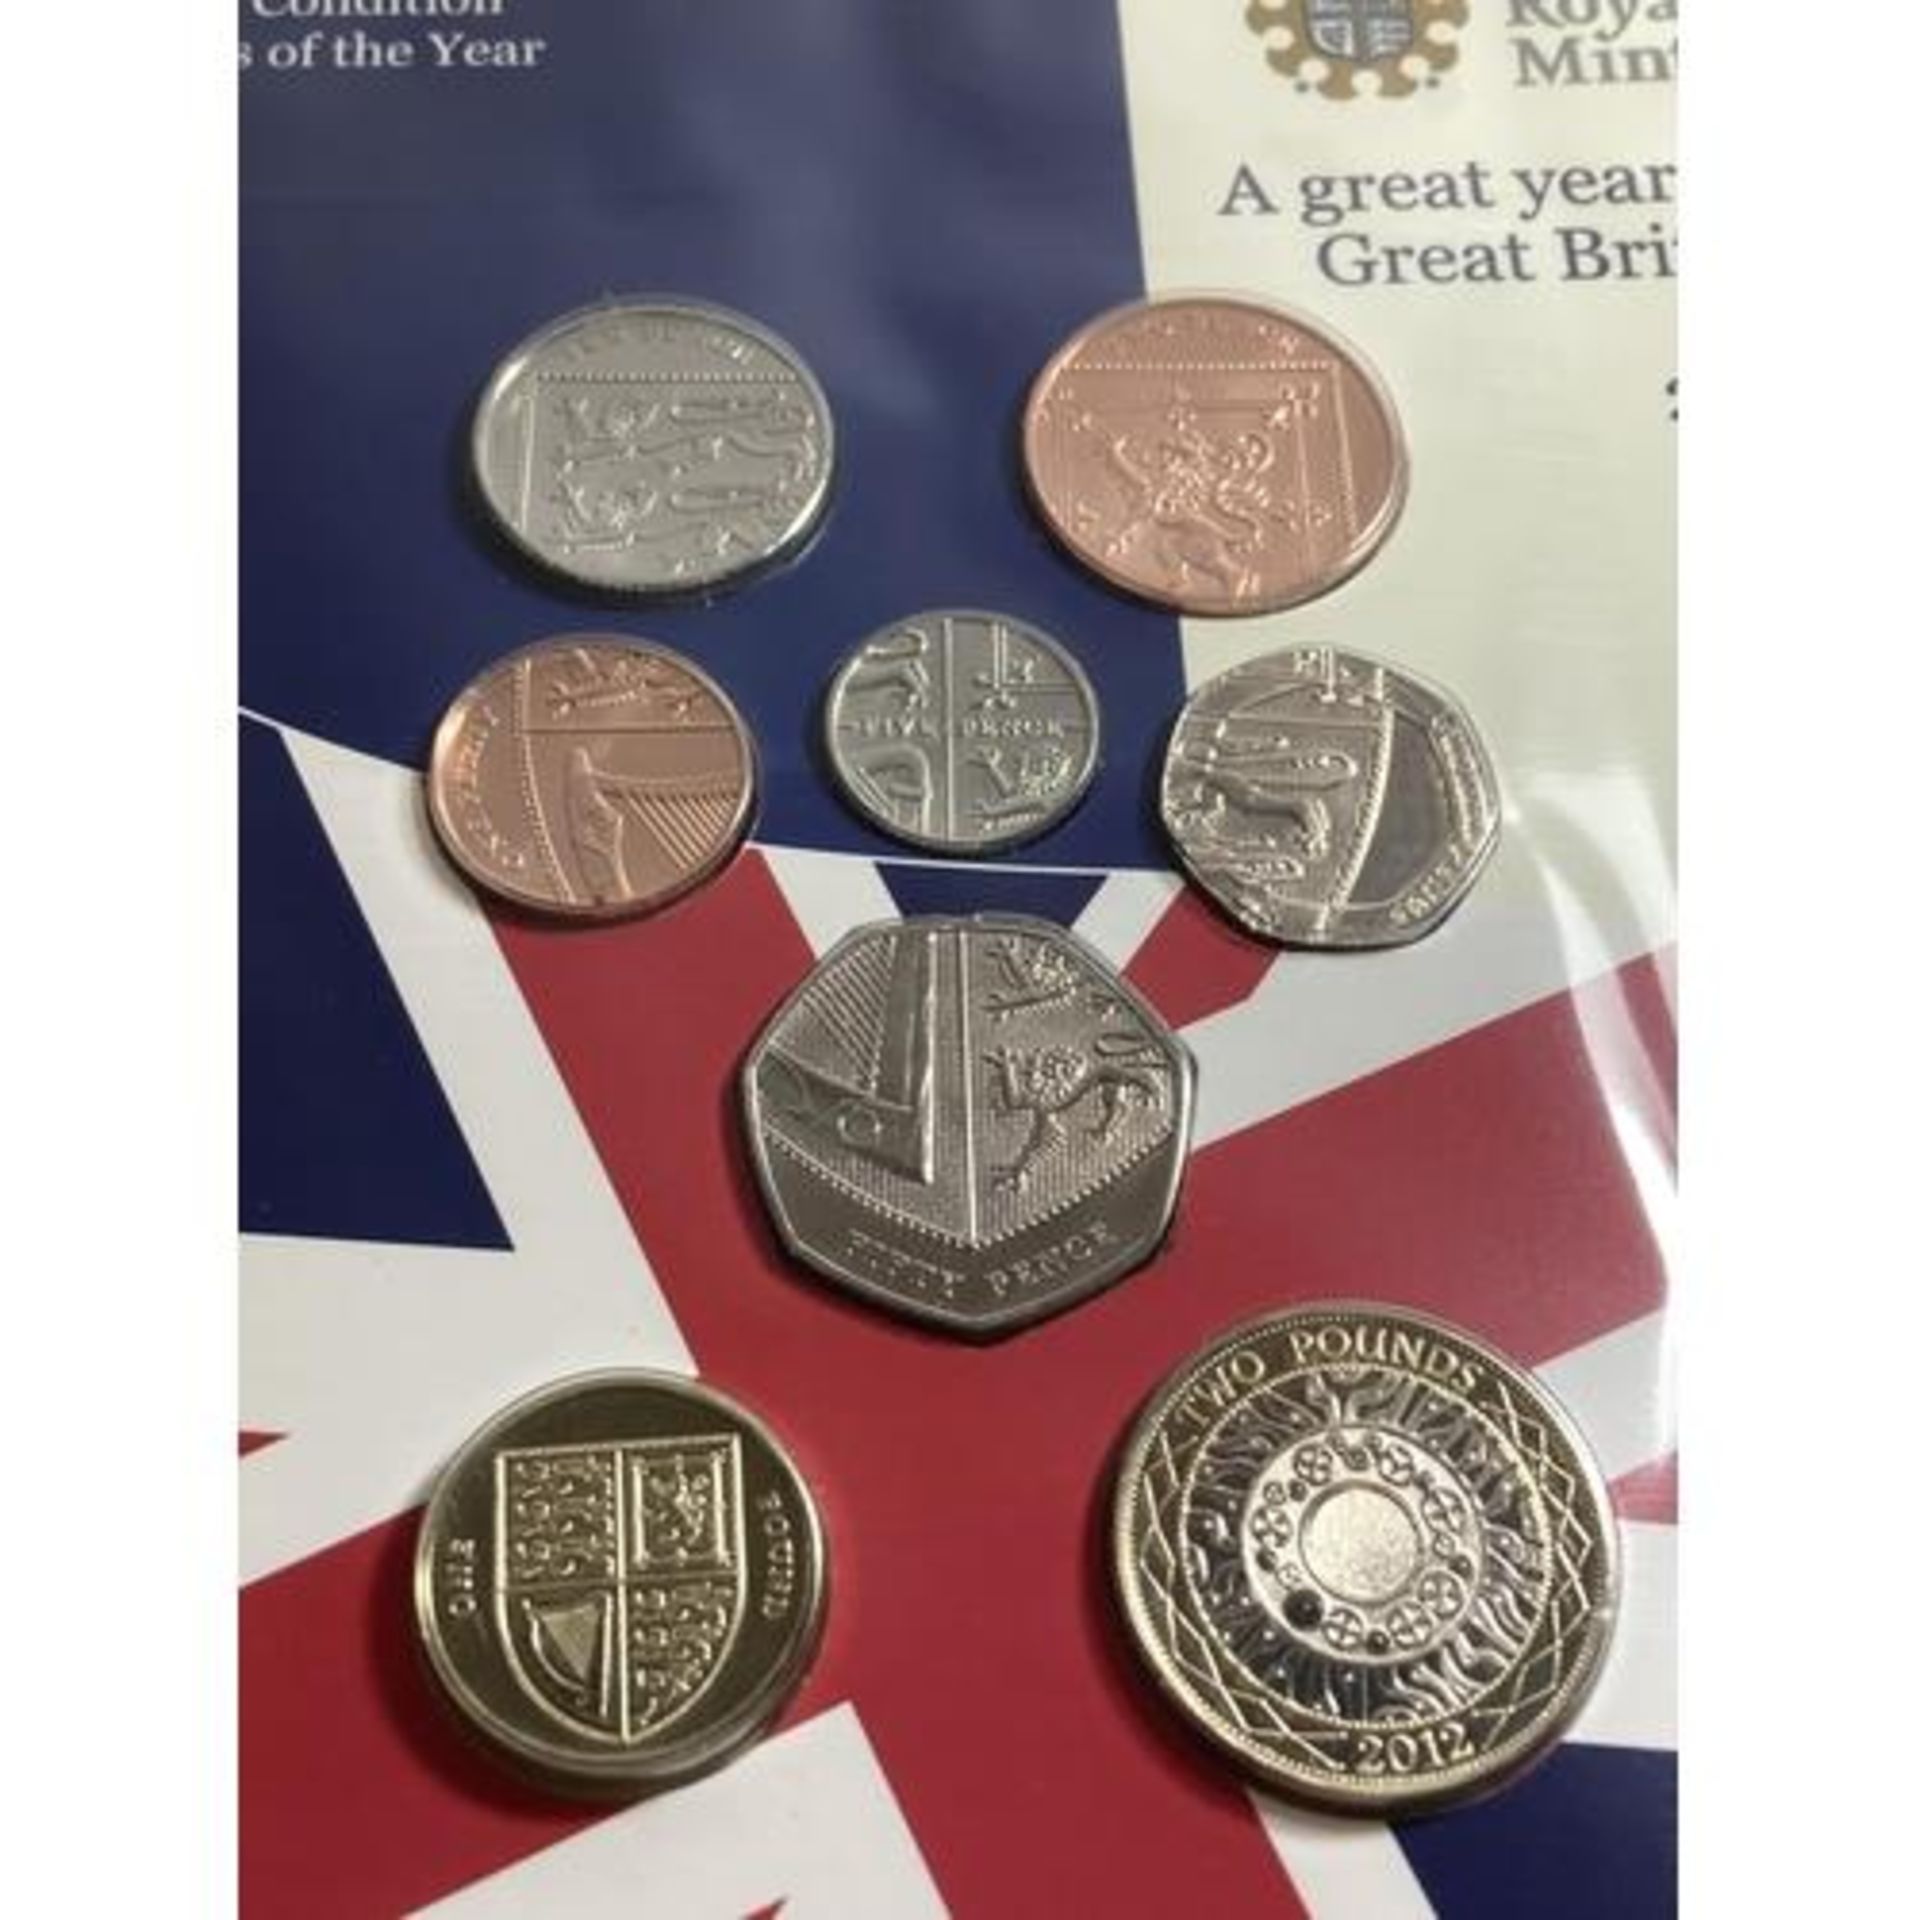 A ROYAL MINT UK 2012 MINT CONDITION COINS OF THE YEAR - Bild 2 aus 2